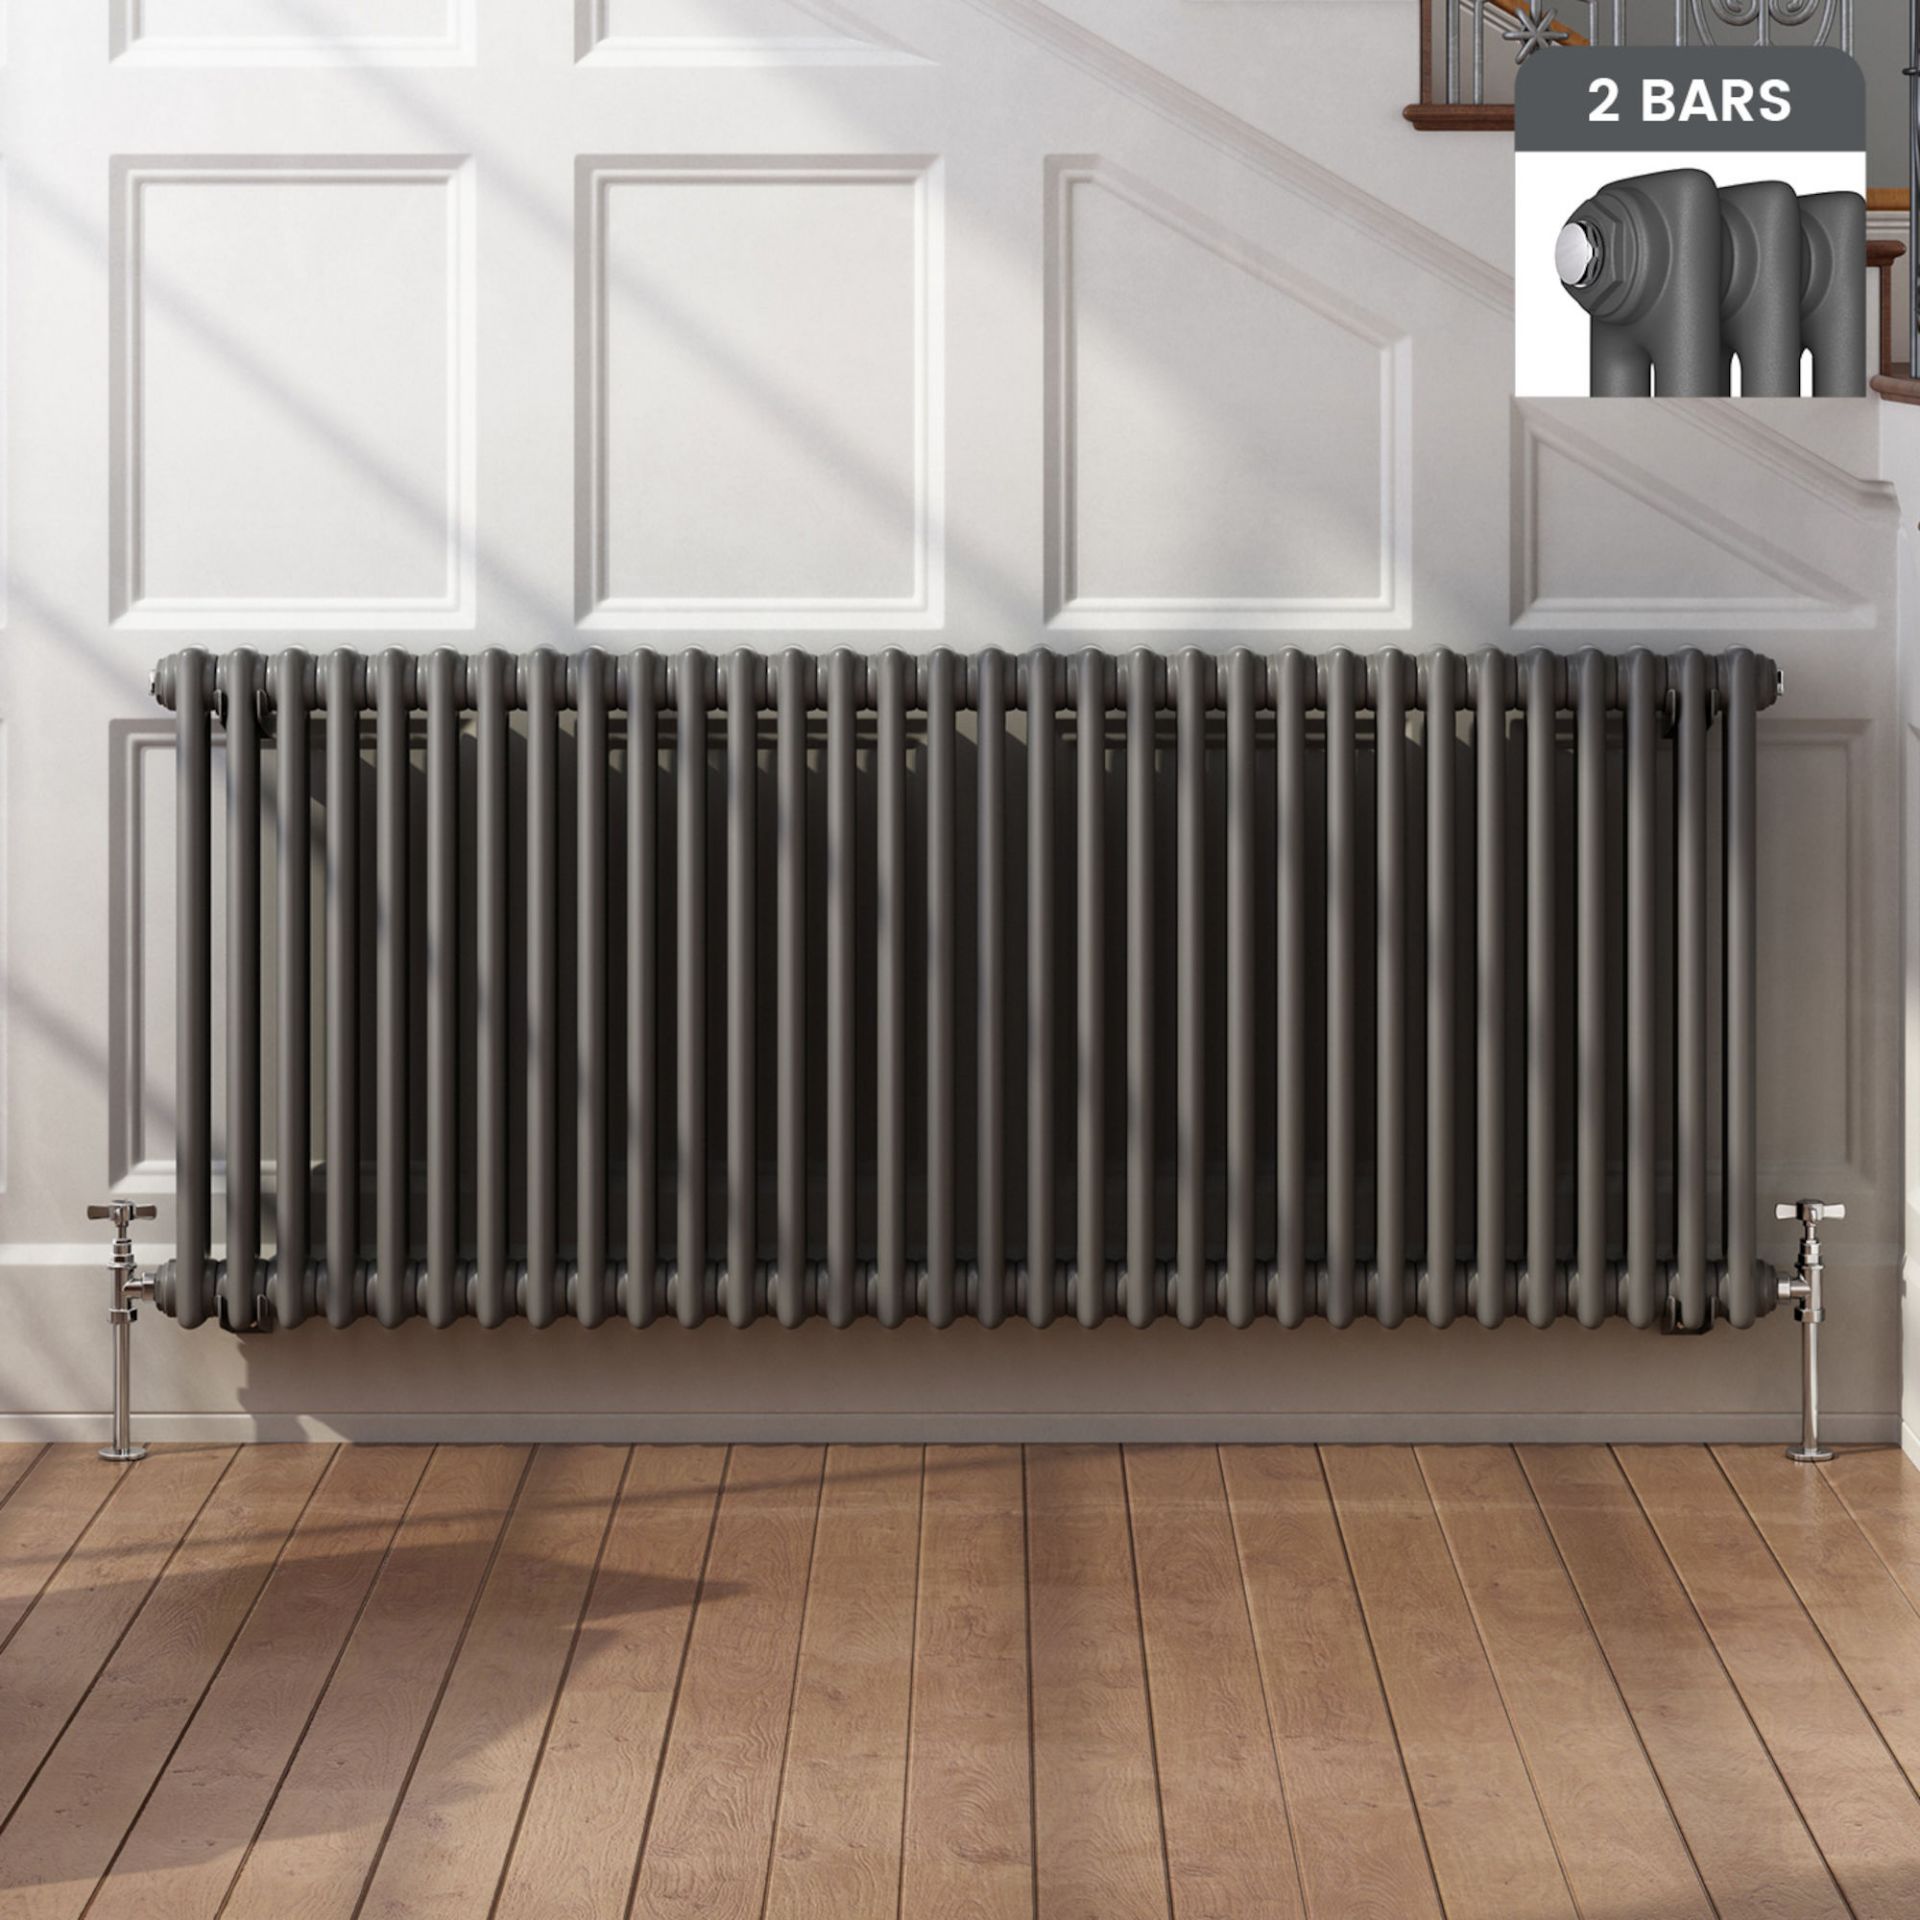 (XM122) 600x1458mm Anthracite Double Panel Horizontal Colosseum Traditional Radiator. RRP £539.99.